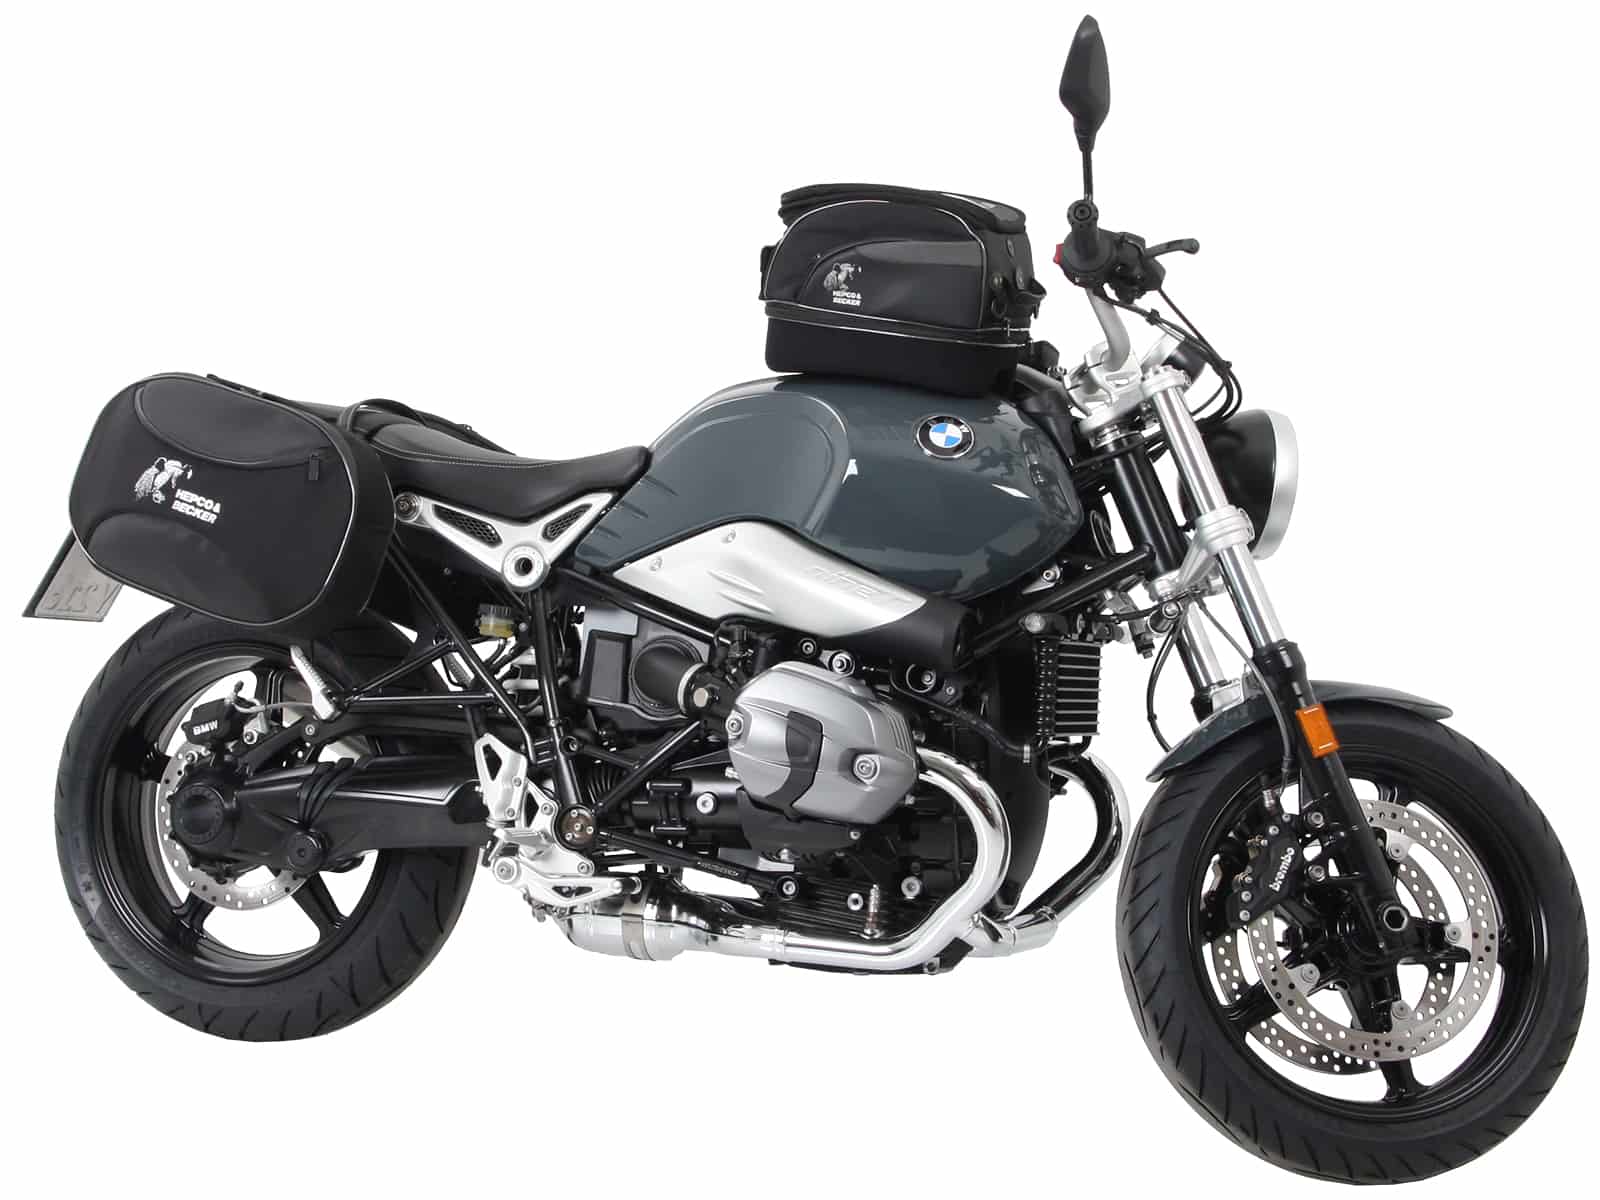 C-Bow sidecarrier for BMW R nineT Pure (2017-2023)